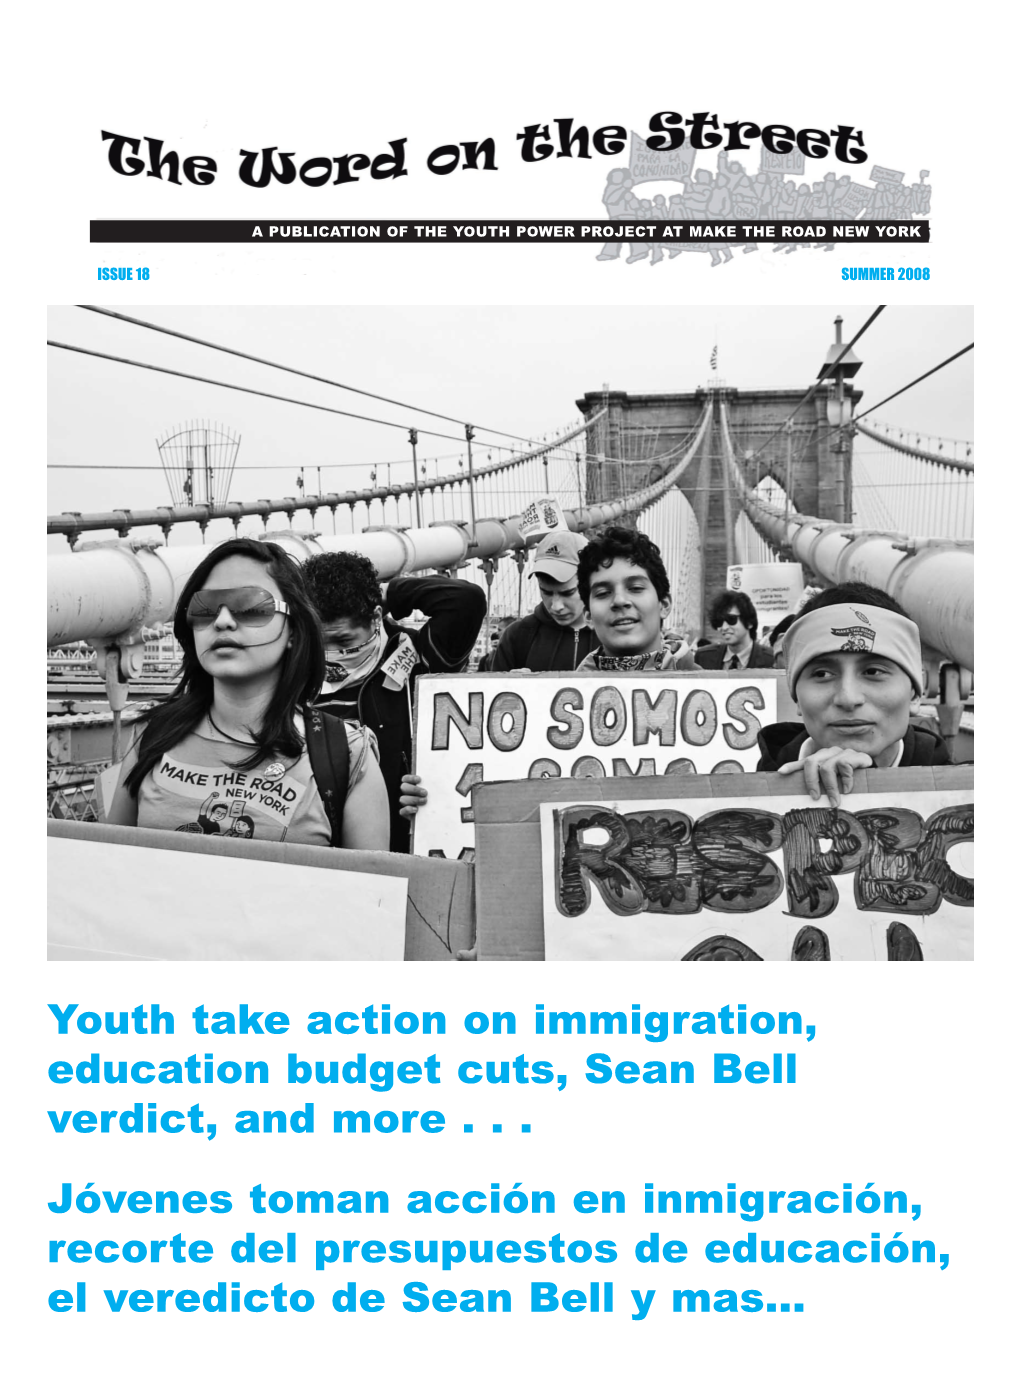 Youth Take Action on Immigration, Education Budget Cuts, Sean Bell Verdict, and More